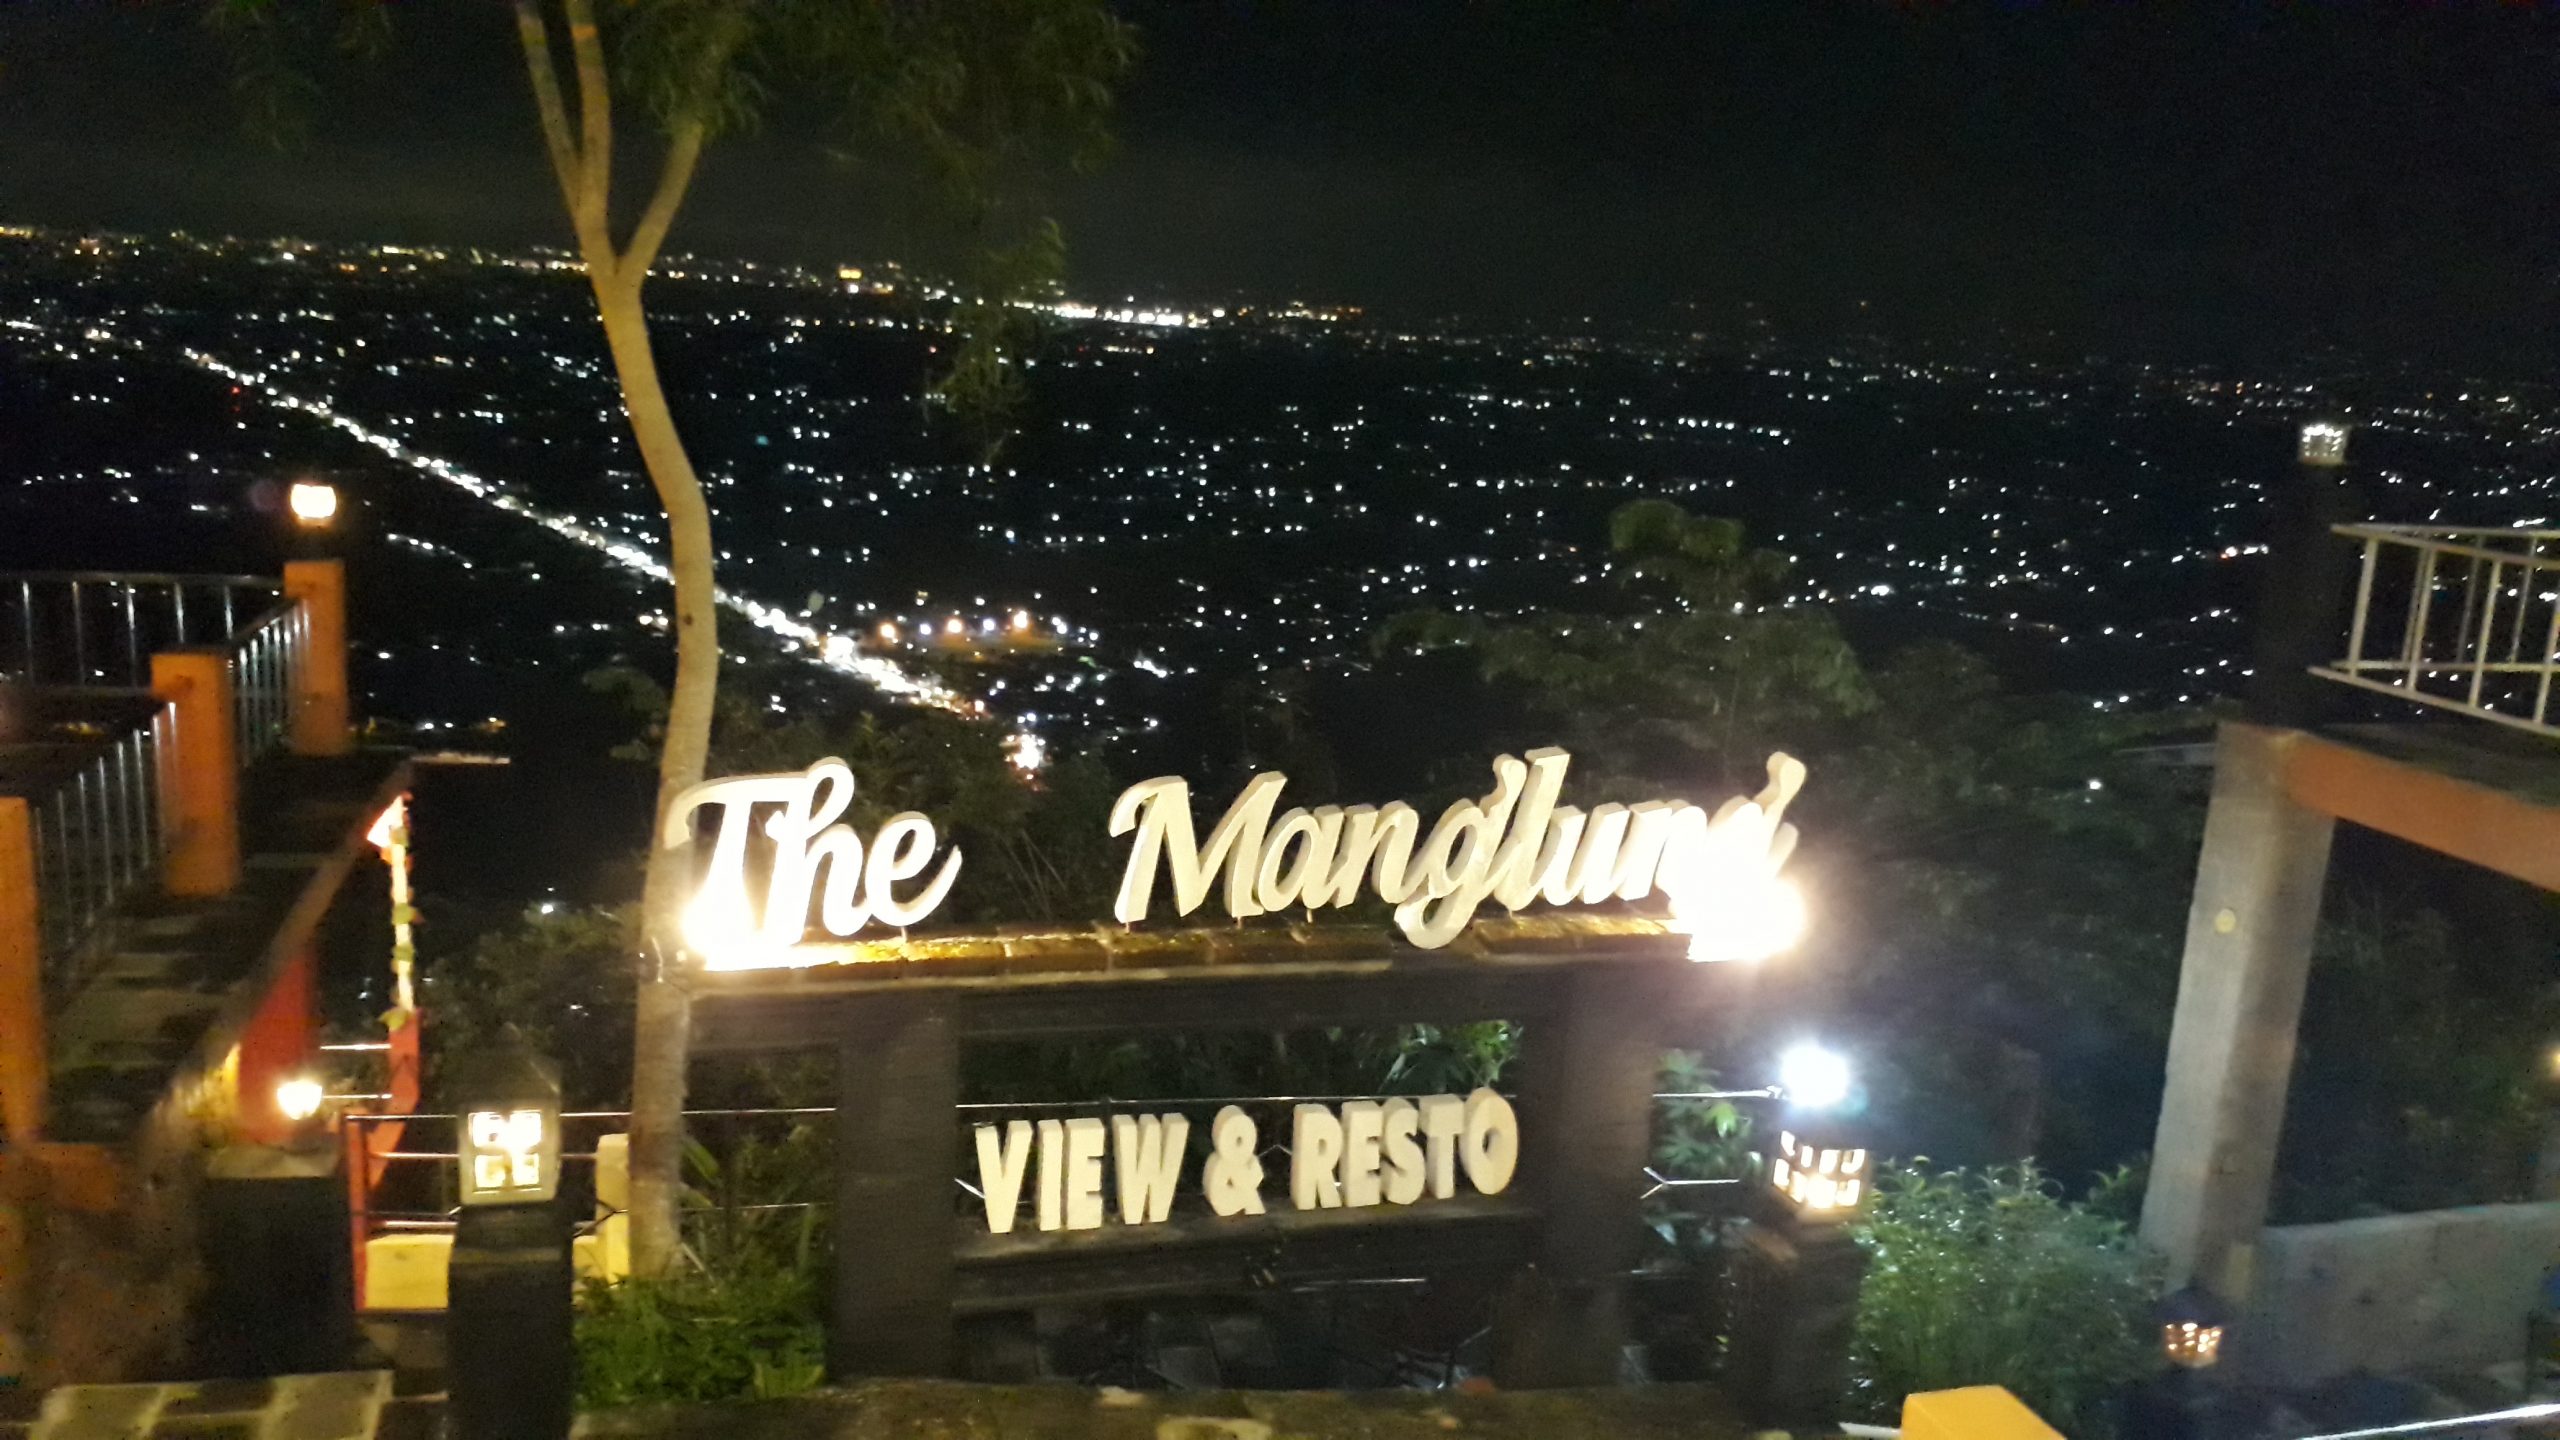 The Manglung